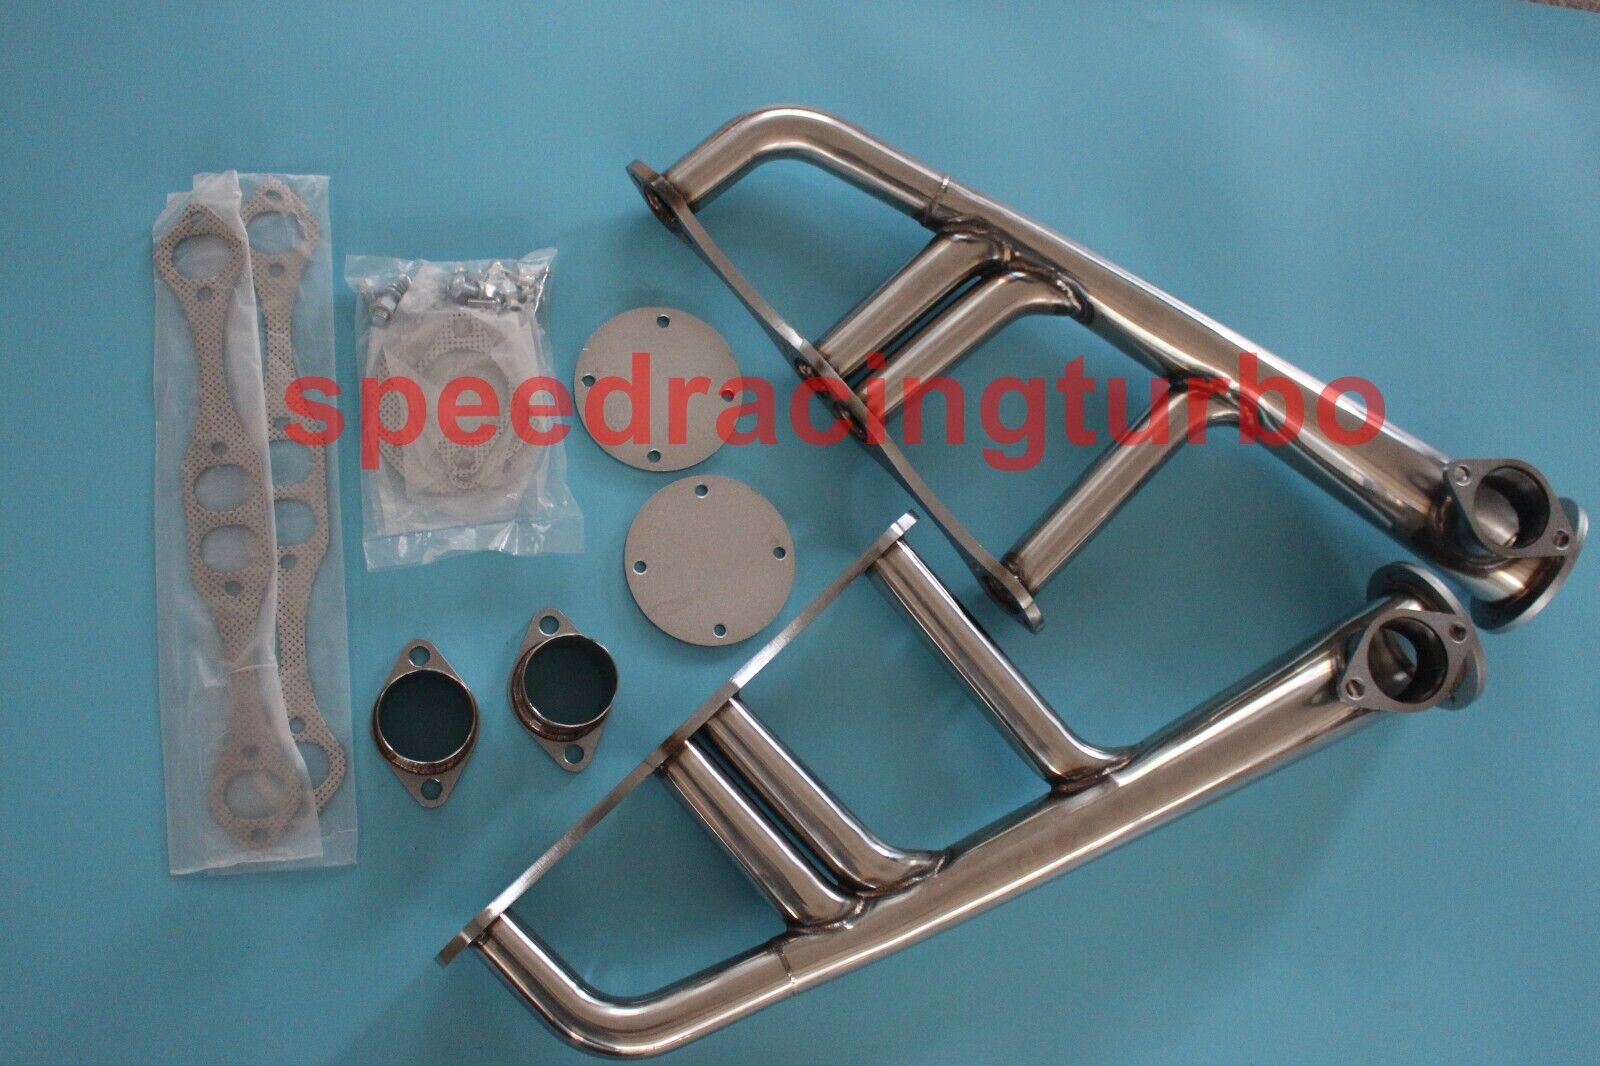 STAINLESS STEEL LAKE STYLE HEADERS FOR SBC 265-400 V8 CHEVY,HOT ROD,STREET,RAT